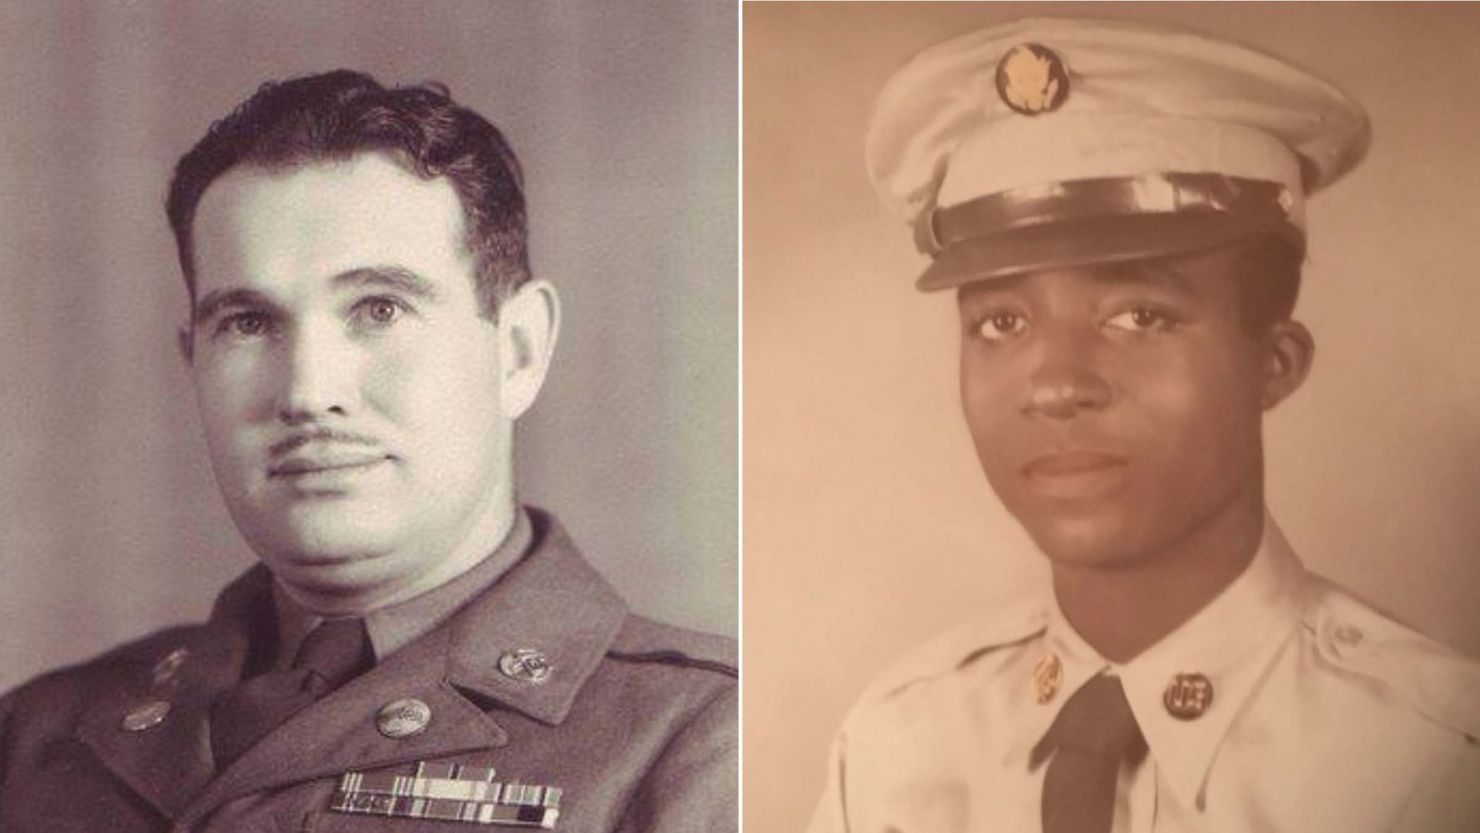 The US identified the remains of two American soldiers, Army Master Sgt. Charles H. McDaniel, left and Army Pfc. William H. Jones, right. 